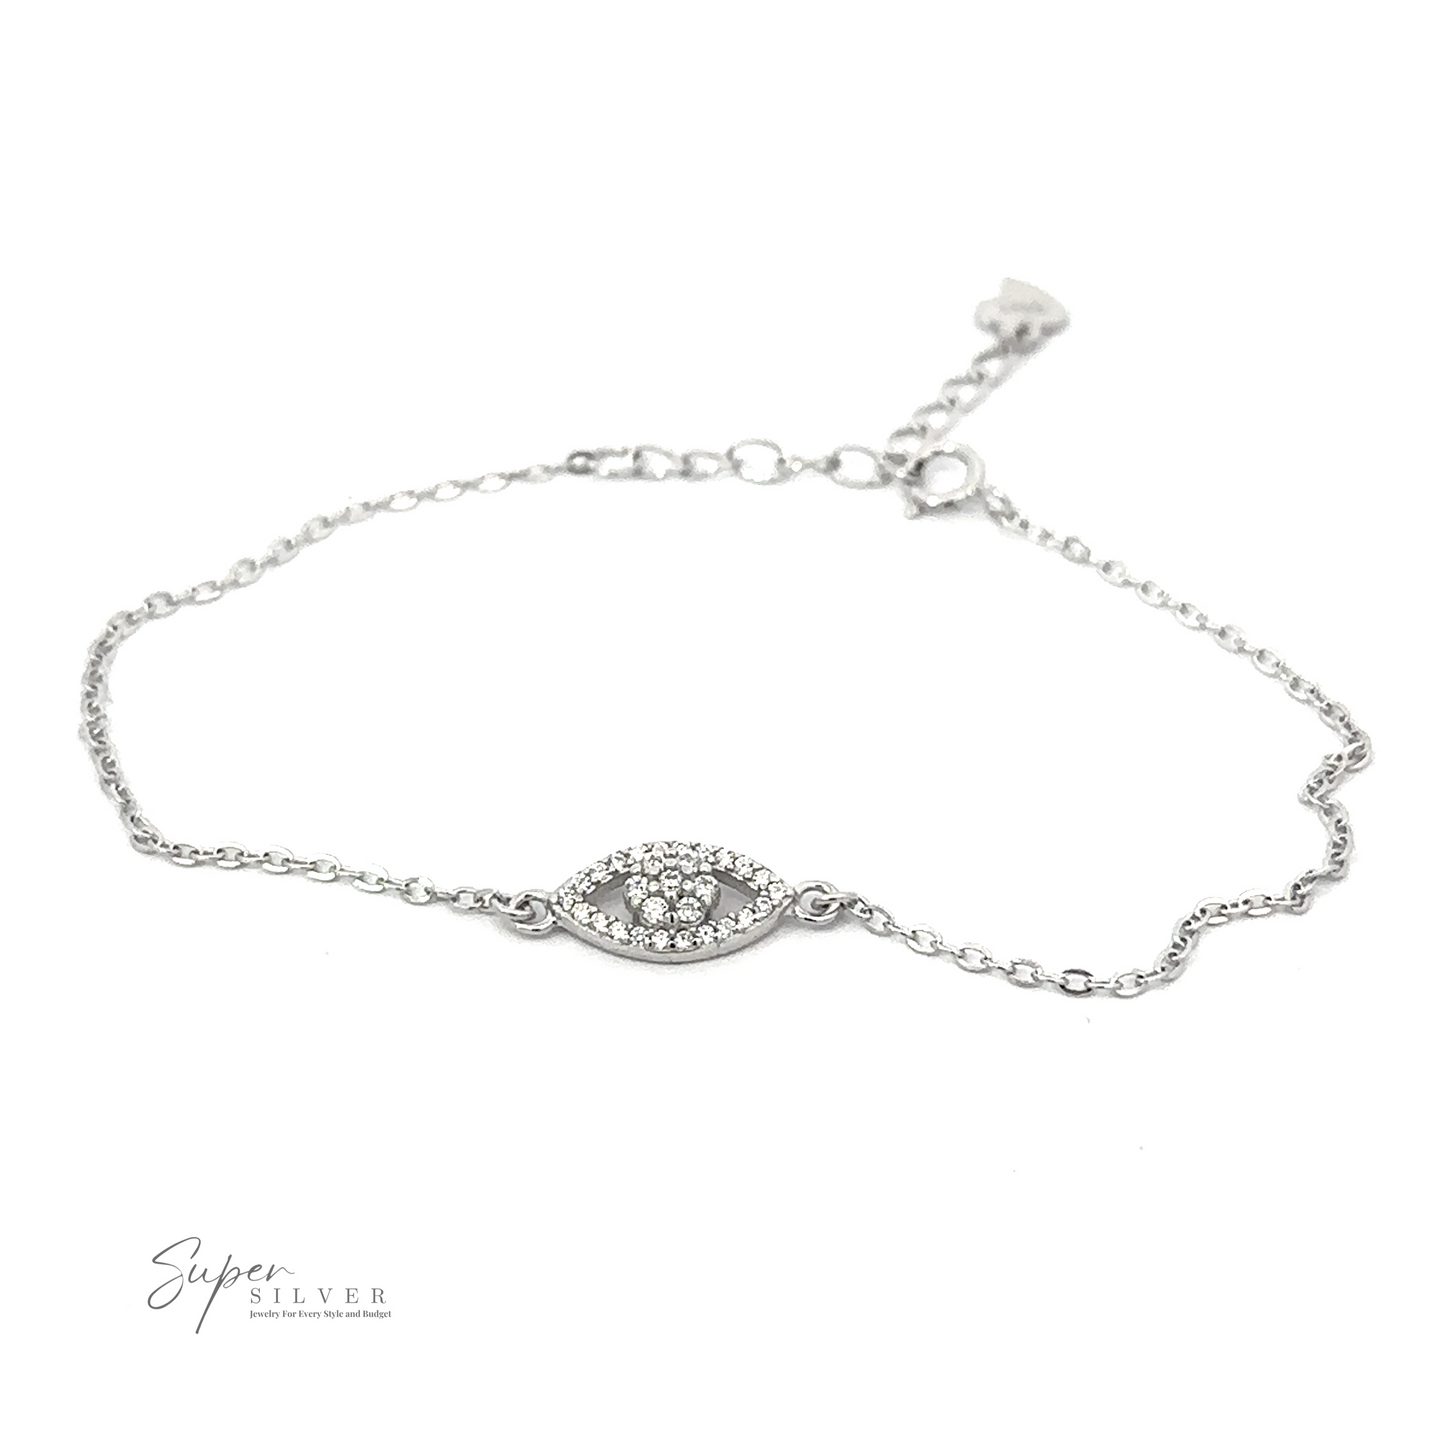 
                  
                    Dainty Cubic Zirconia Evil Eye Bracelet with a central oval-shaped charm adorned with small clear cubic zirconia crystals. The bracelet features a delicate chain and an adjustable clasp. The "Super Silver" logo is visible in the lower left corner.
                  
                